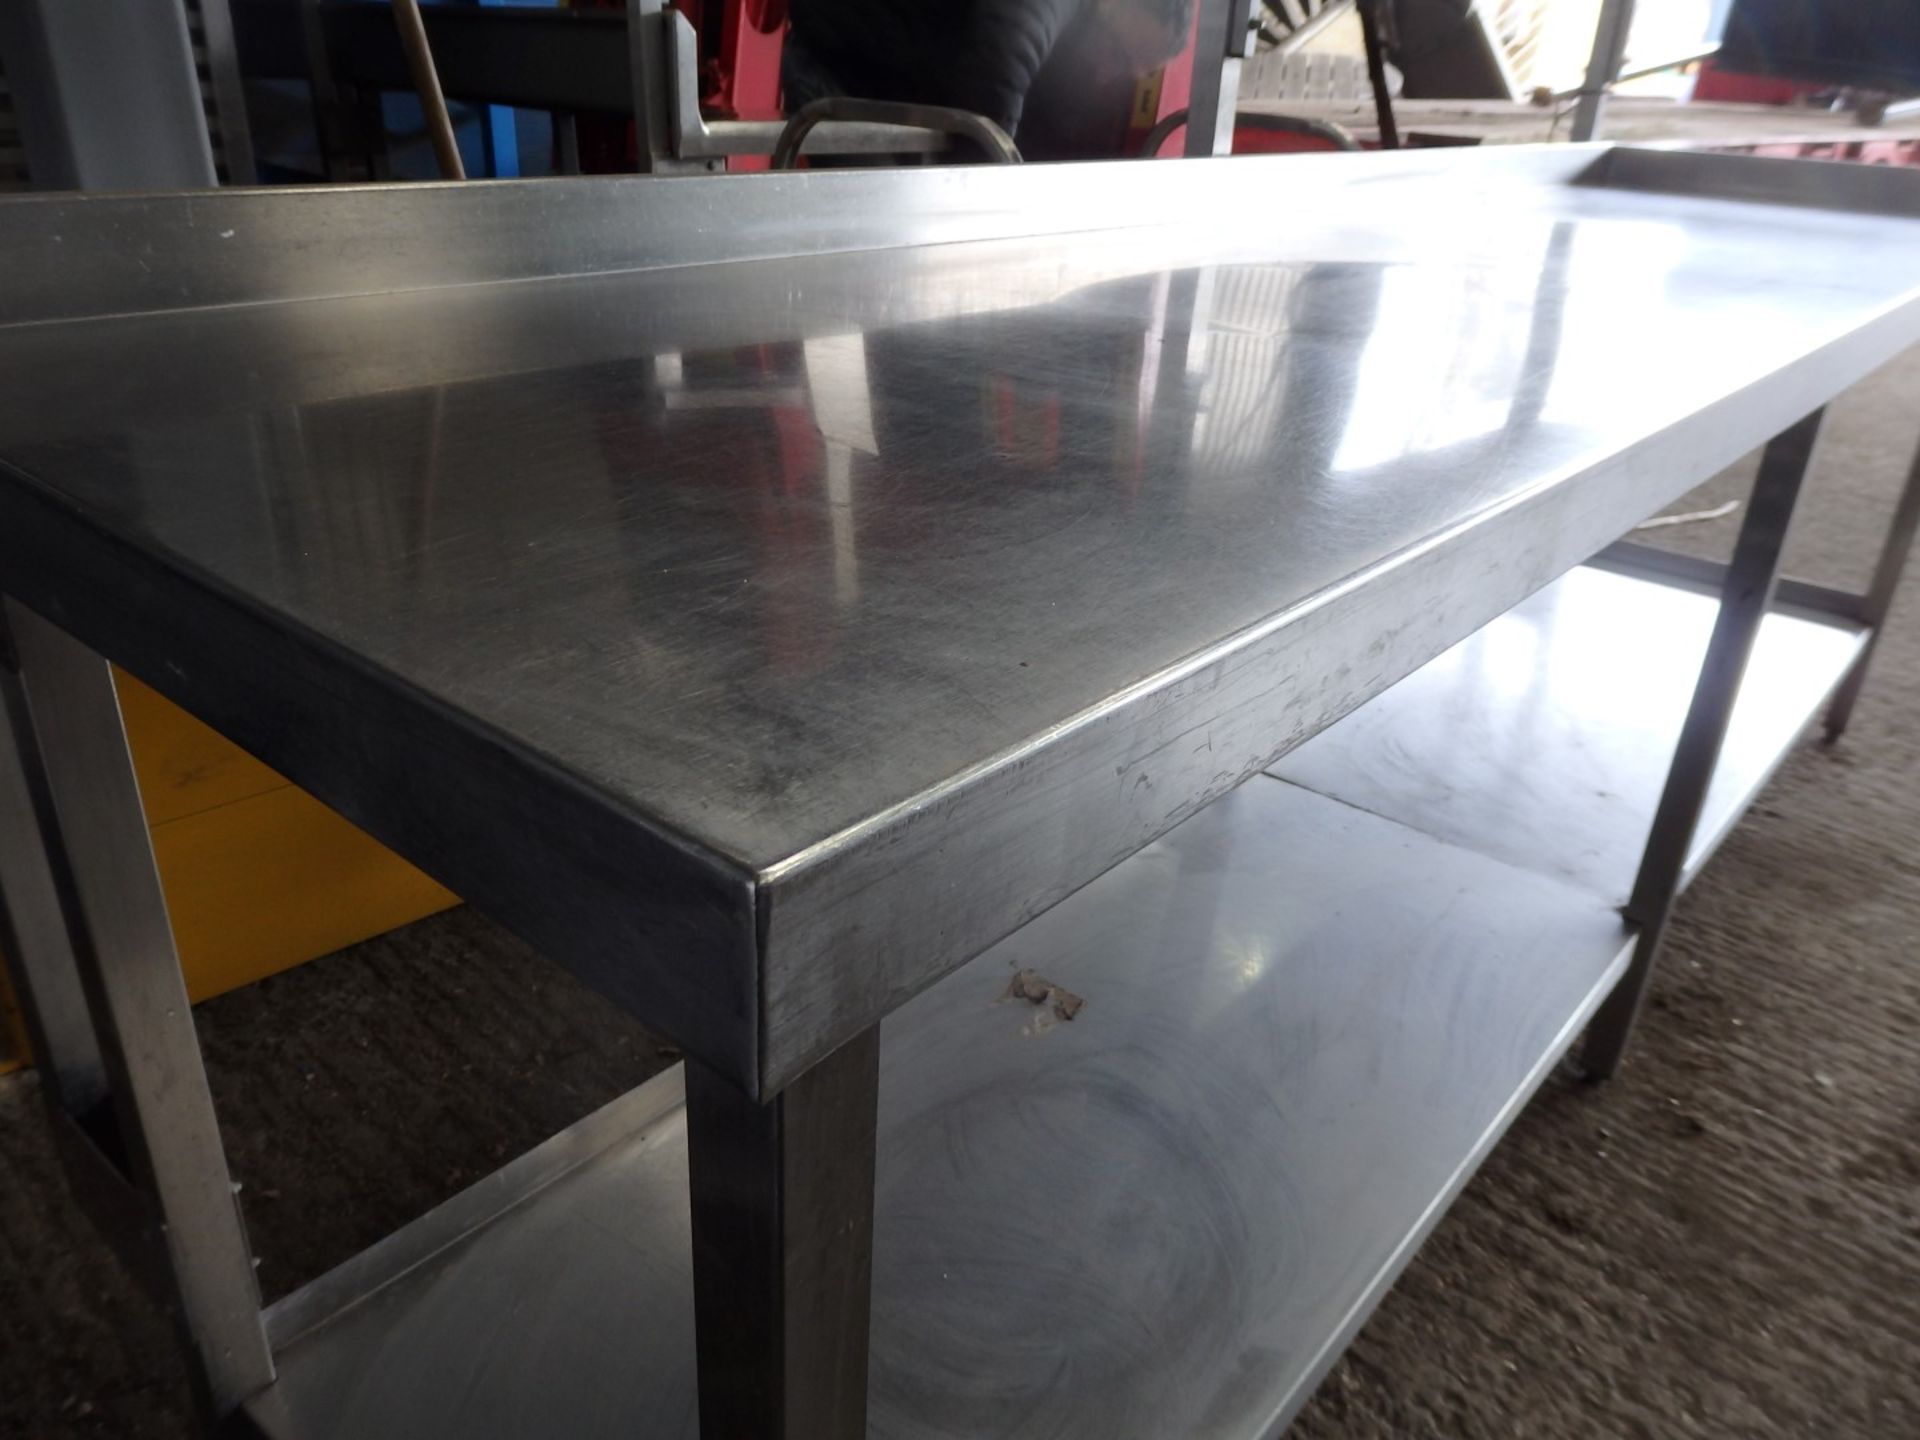 1 x Stainless Steel Commercial Kitchen Prep Bench With Undershelf and Overshelf - CL057 - H86/130 - Image 4 of 4